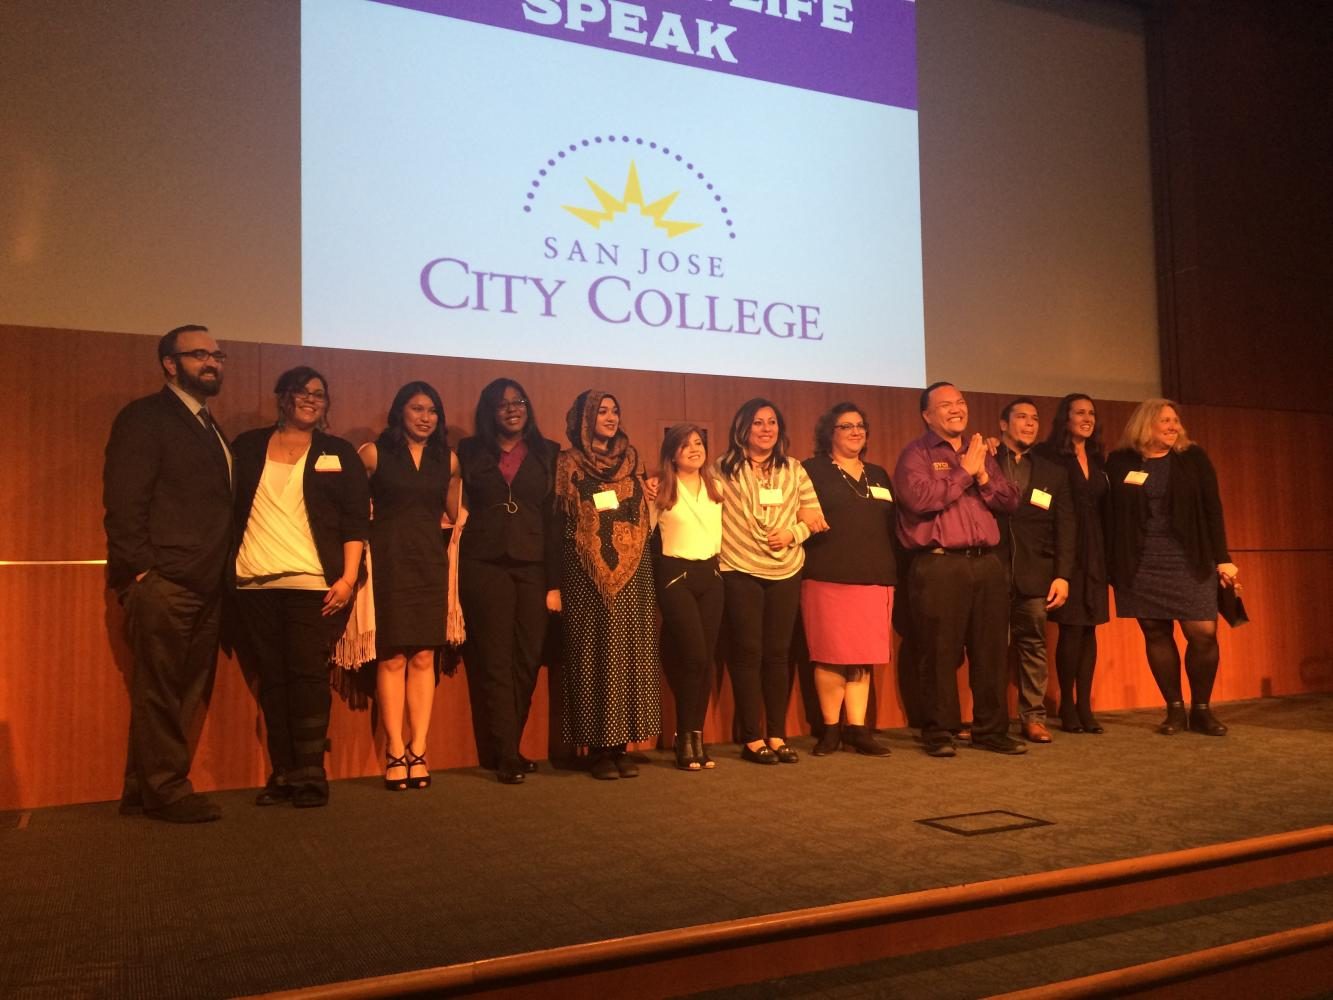 San Jose City College professor Chris Lancaster (far left) poses on stage with Life Speak organizers Shelly Giacolone (second to right) and Leslyn McCallum (far right), as student speakers took their final curtain call before the audience in the downtown San Jose Adobe building Friday April 7.